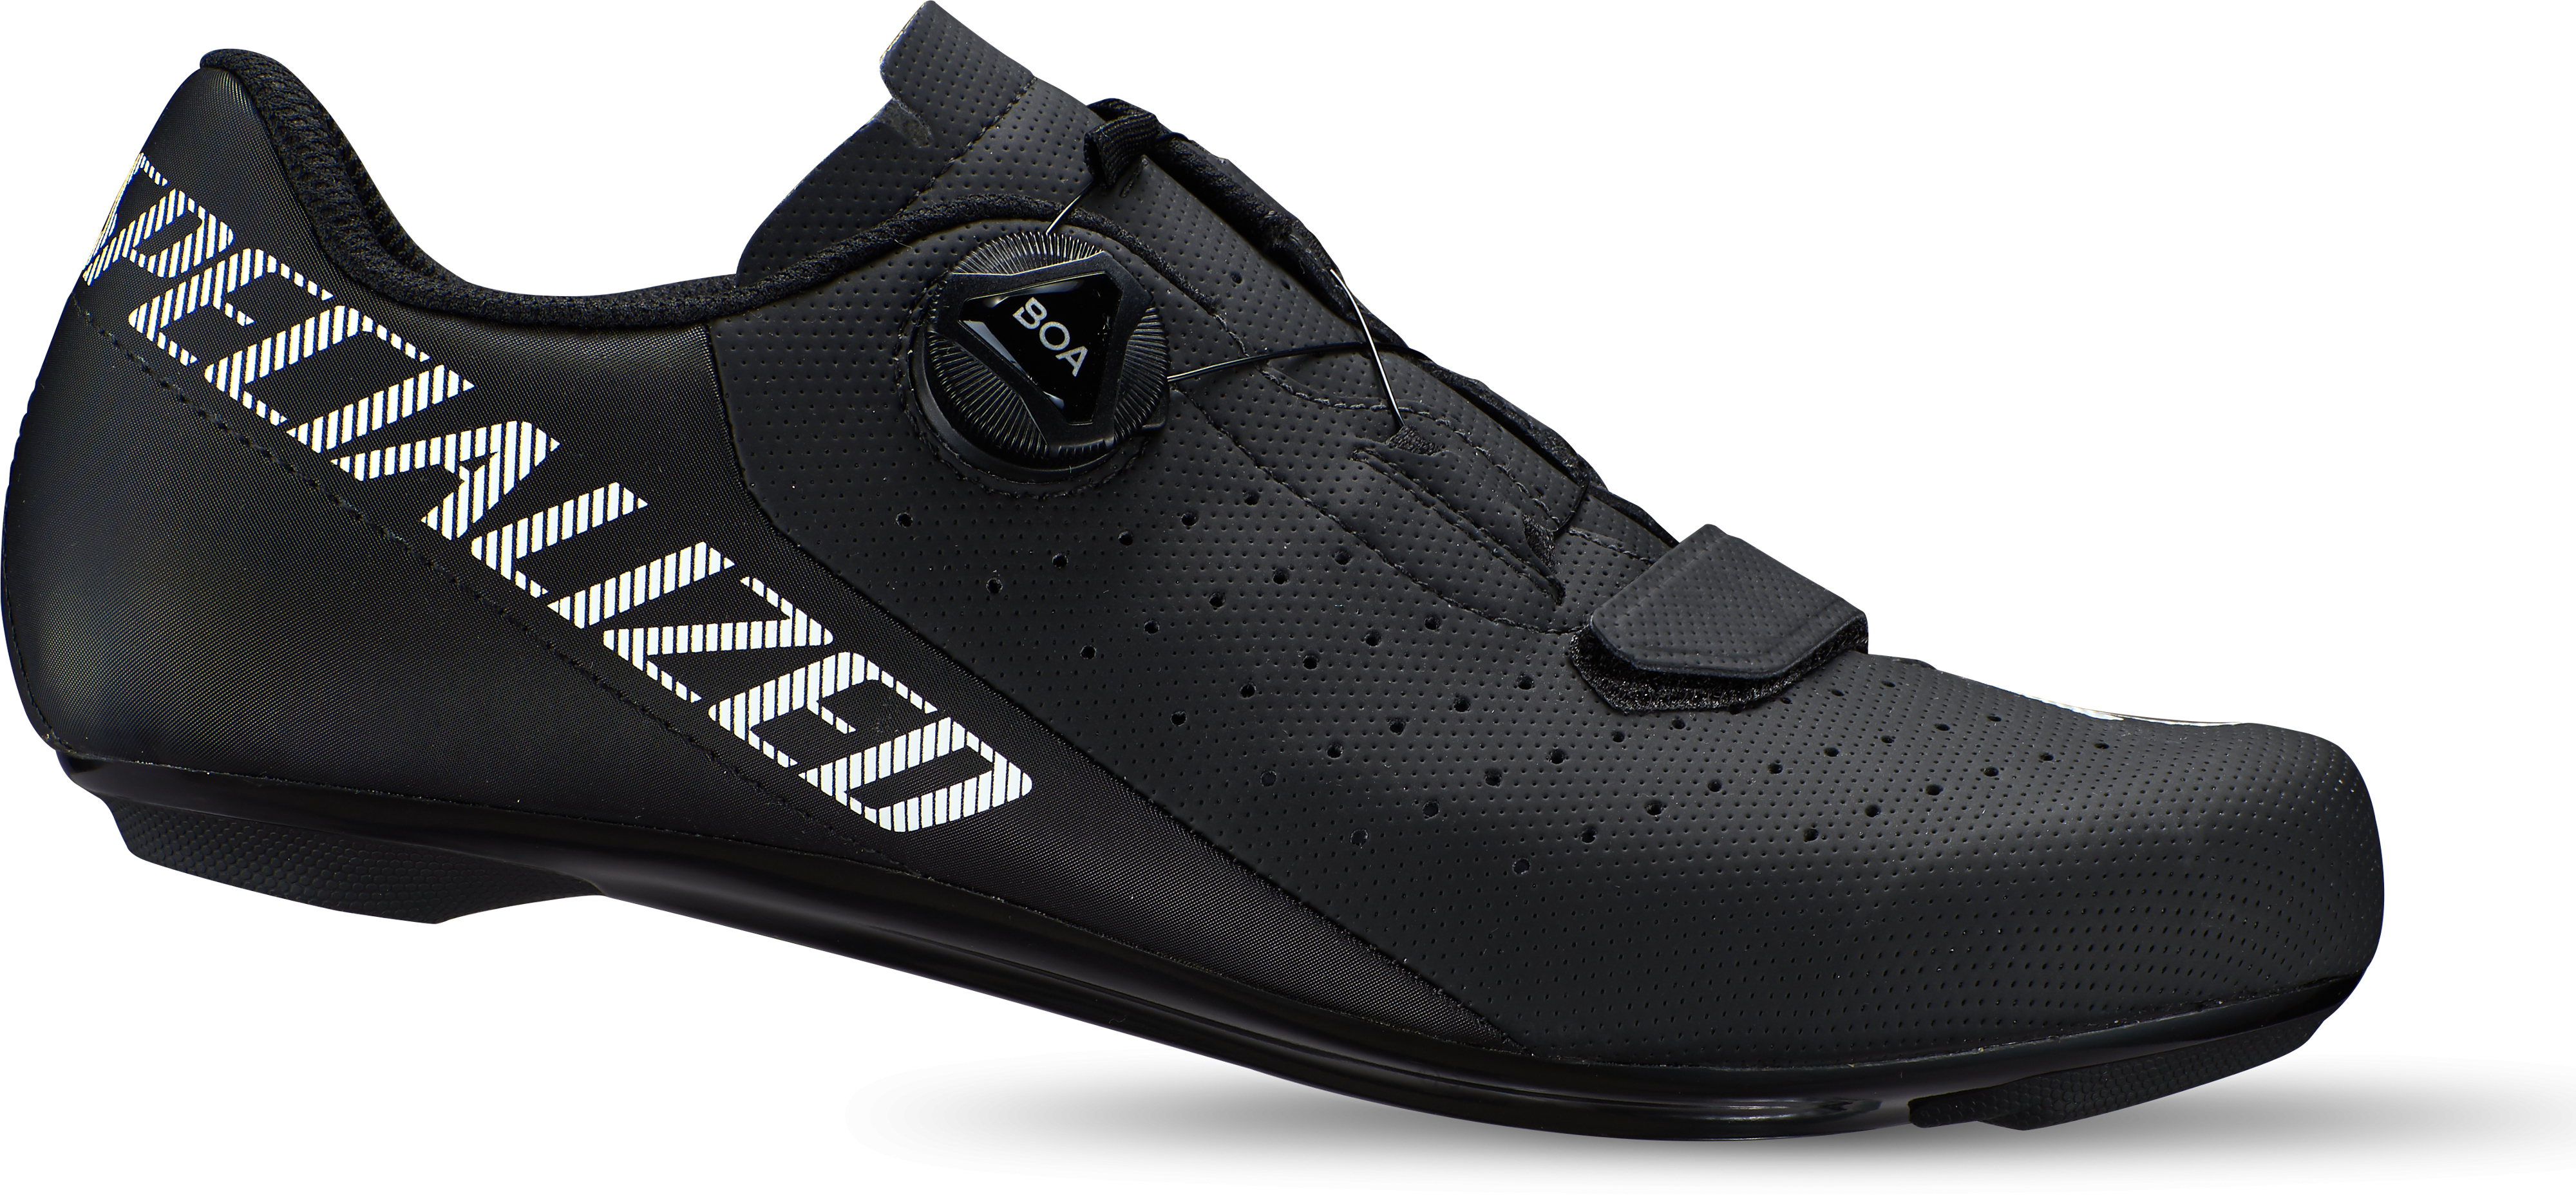 Specialized  Torch 1.0 Road Cycling Shoes  40 Black